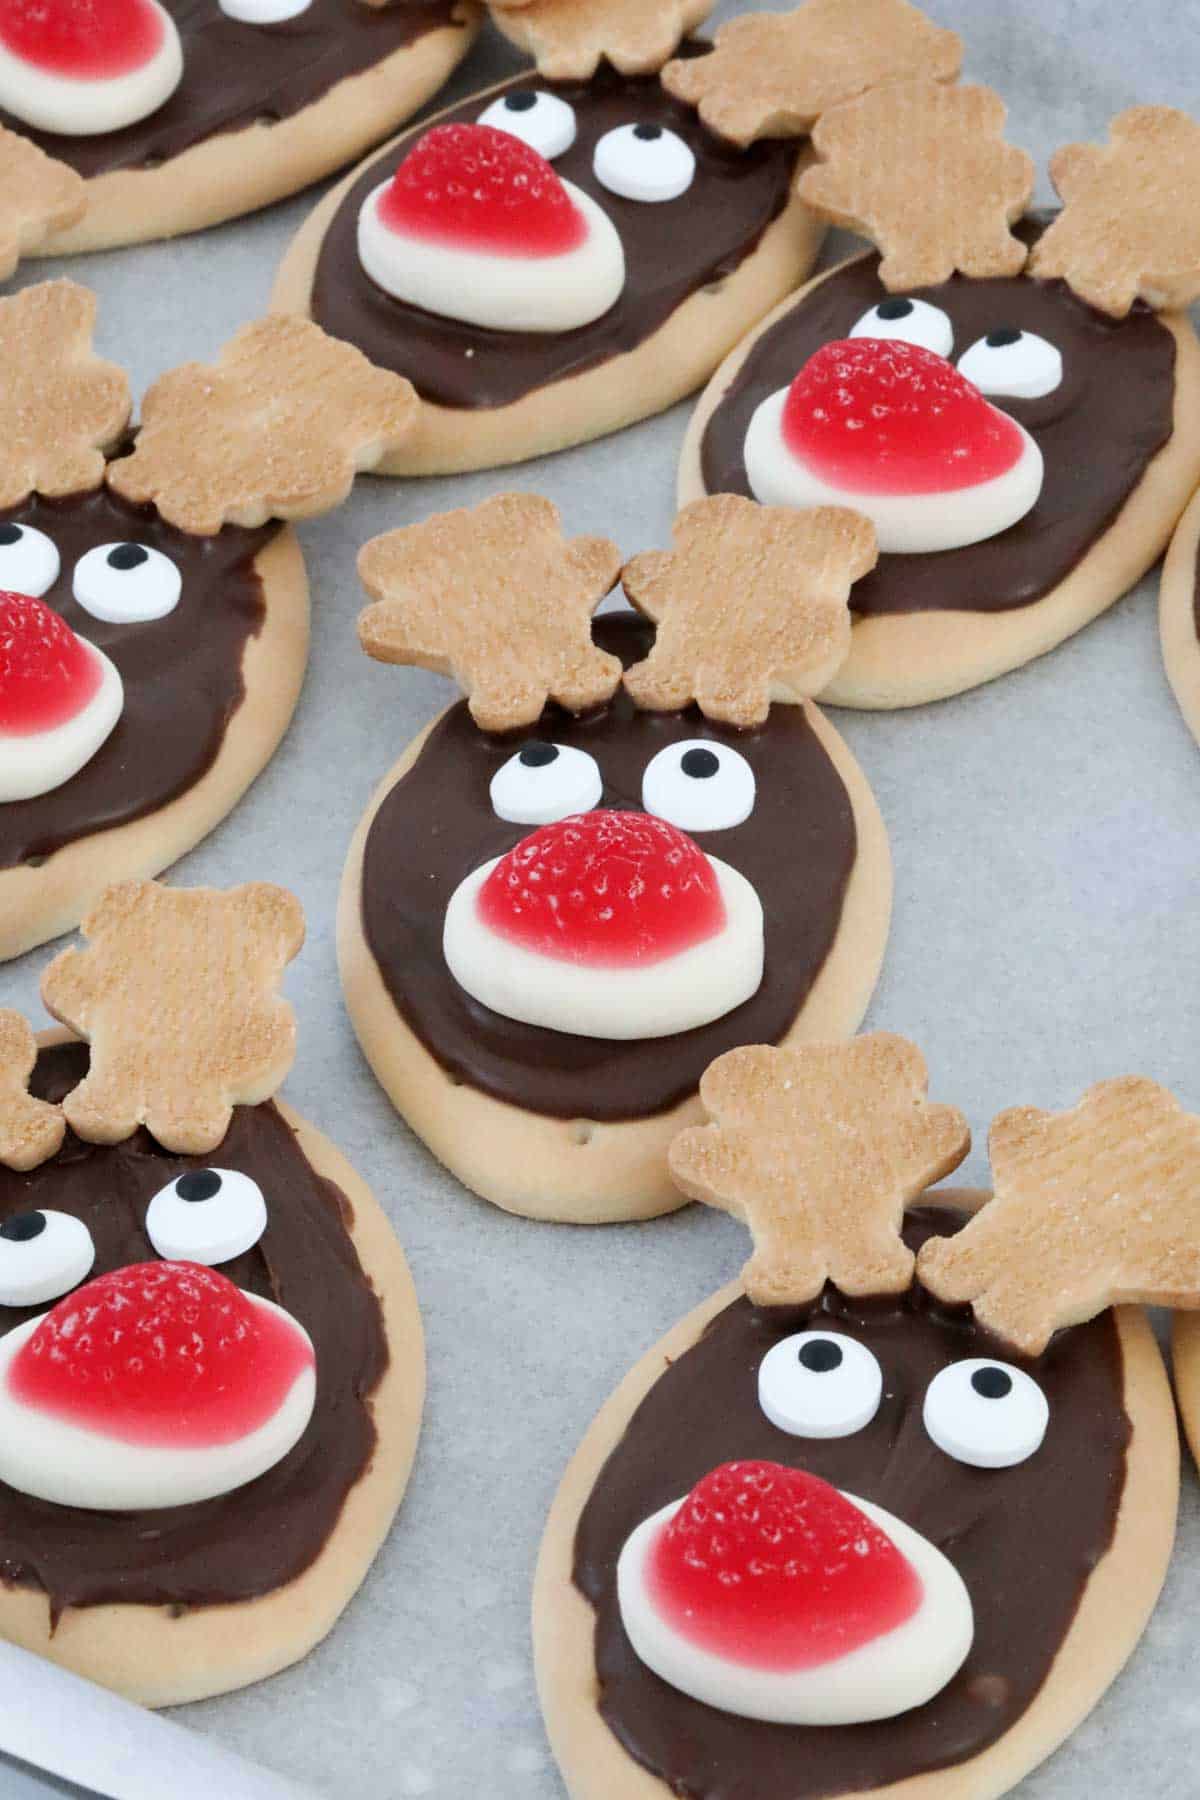 Angled view of cute reindeer biscuits on a lined tray.